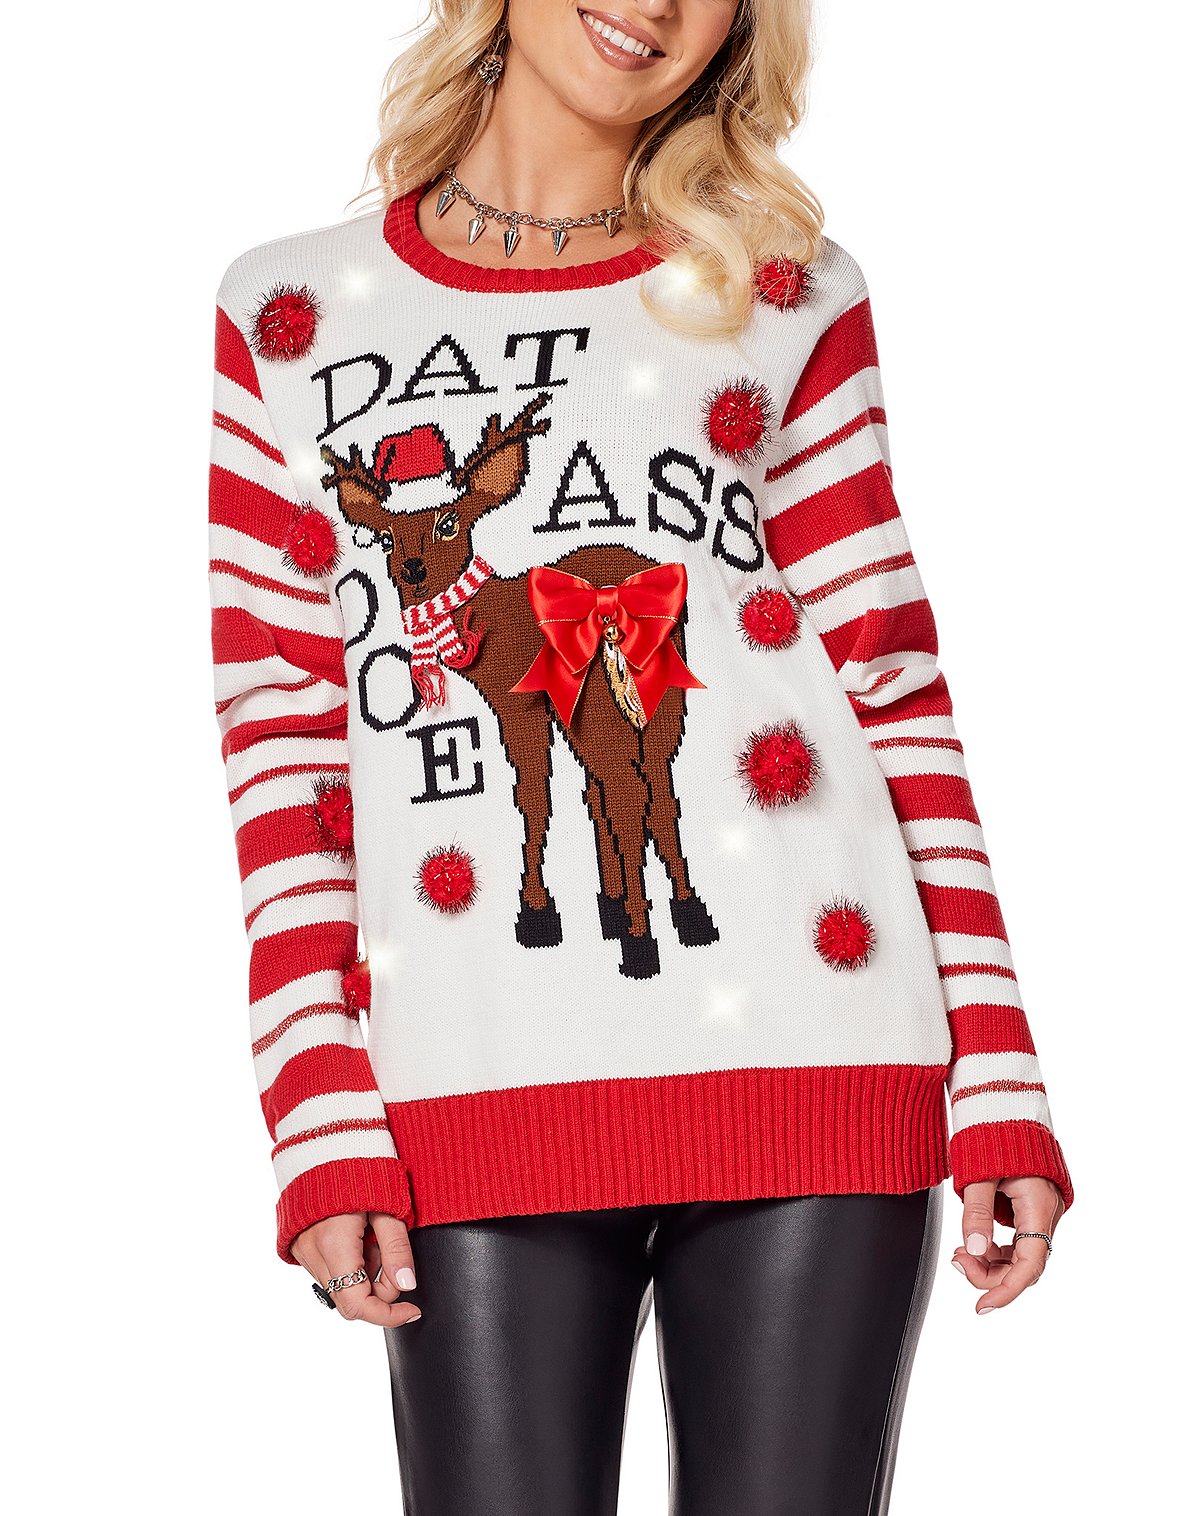 Top 10 Ugly Christmas Sweaters 2022 - The Inspo Spot